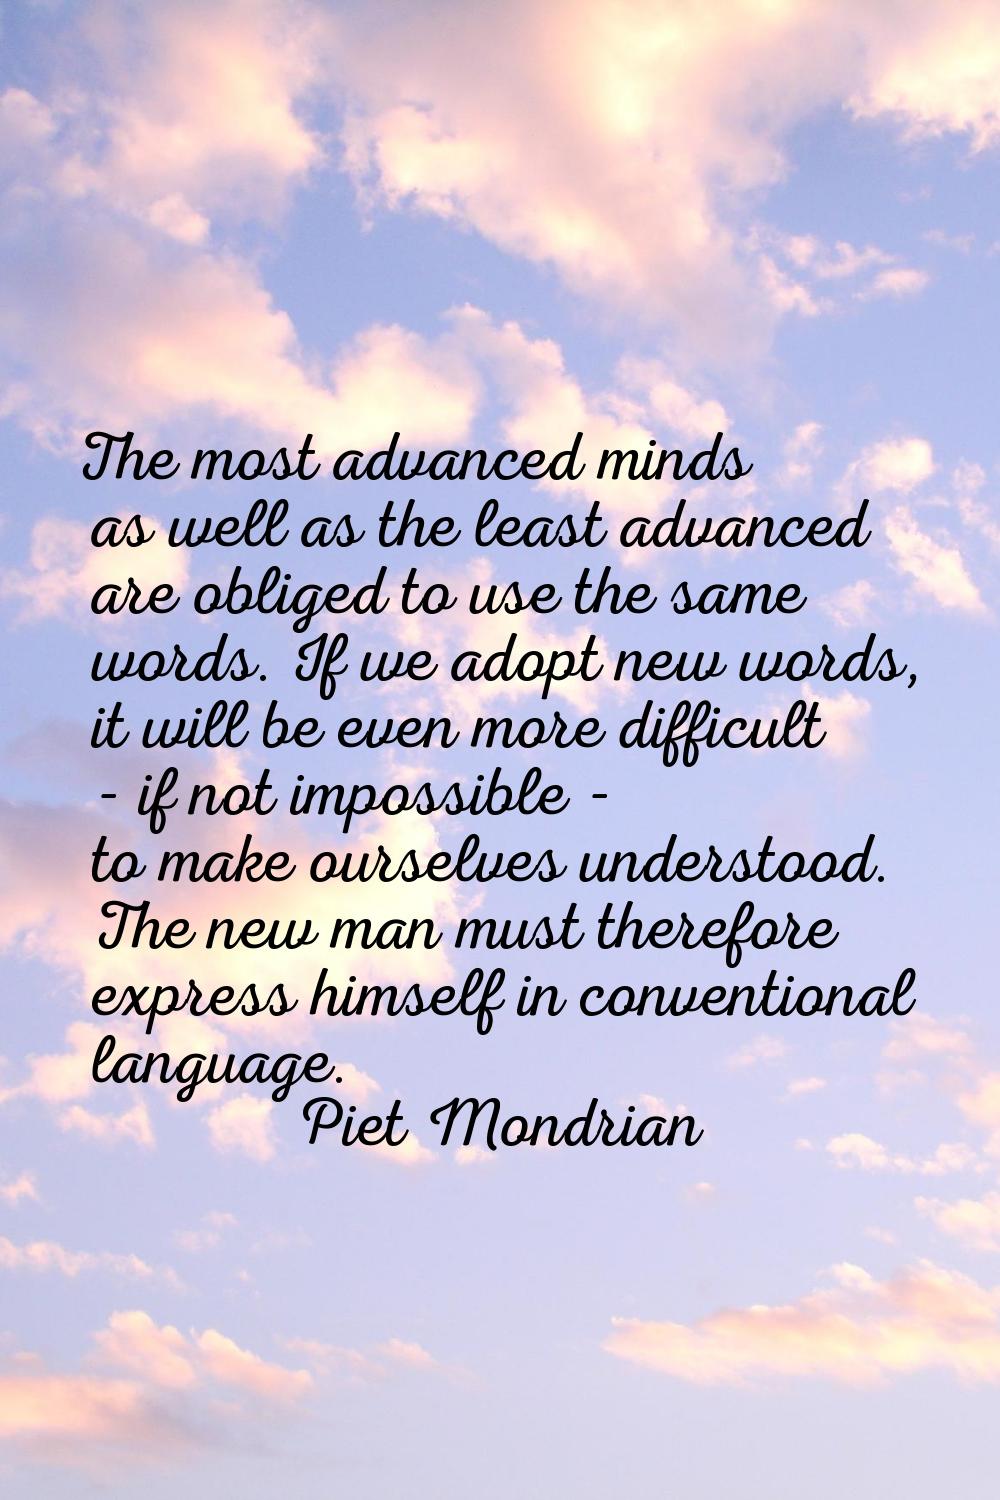 The most advanced minds as well as the least advanced are obliged to use the same words. If we adop